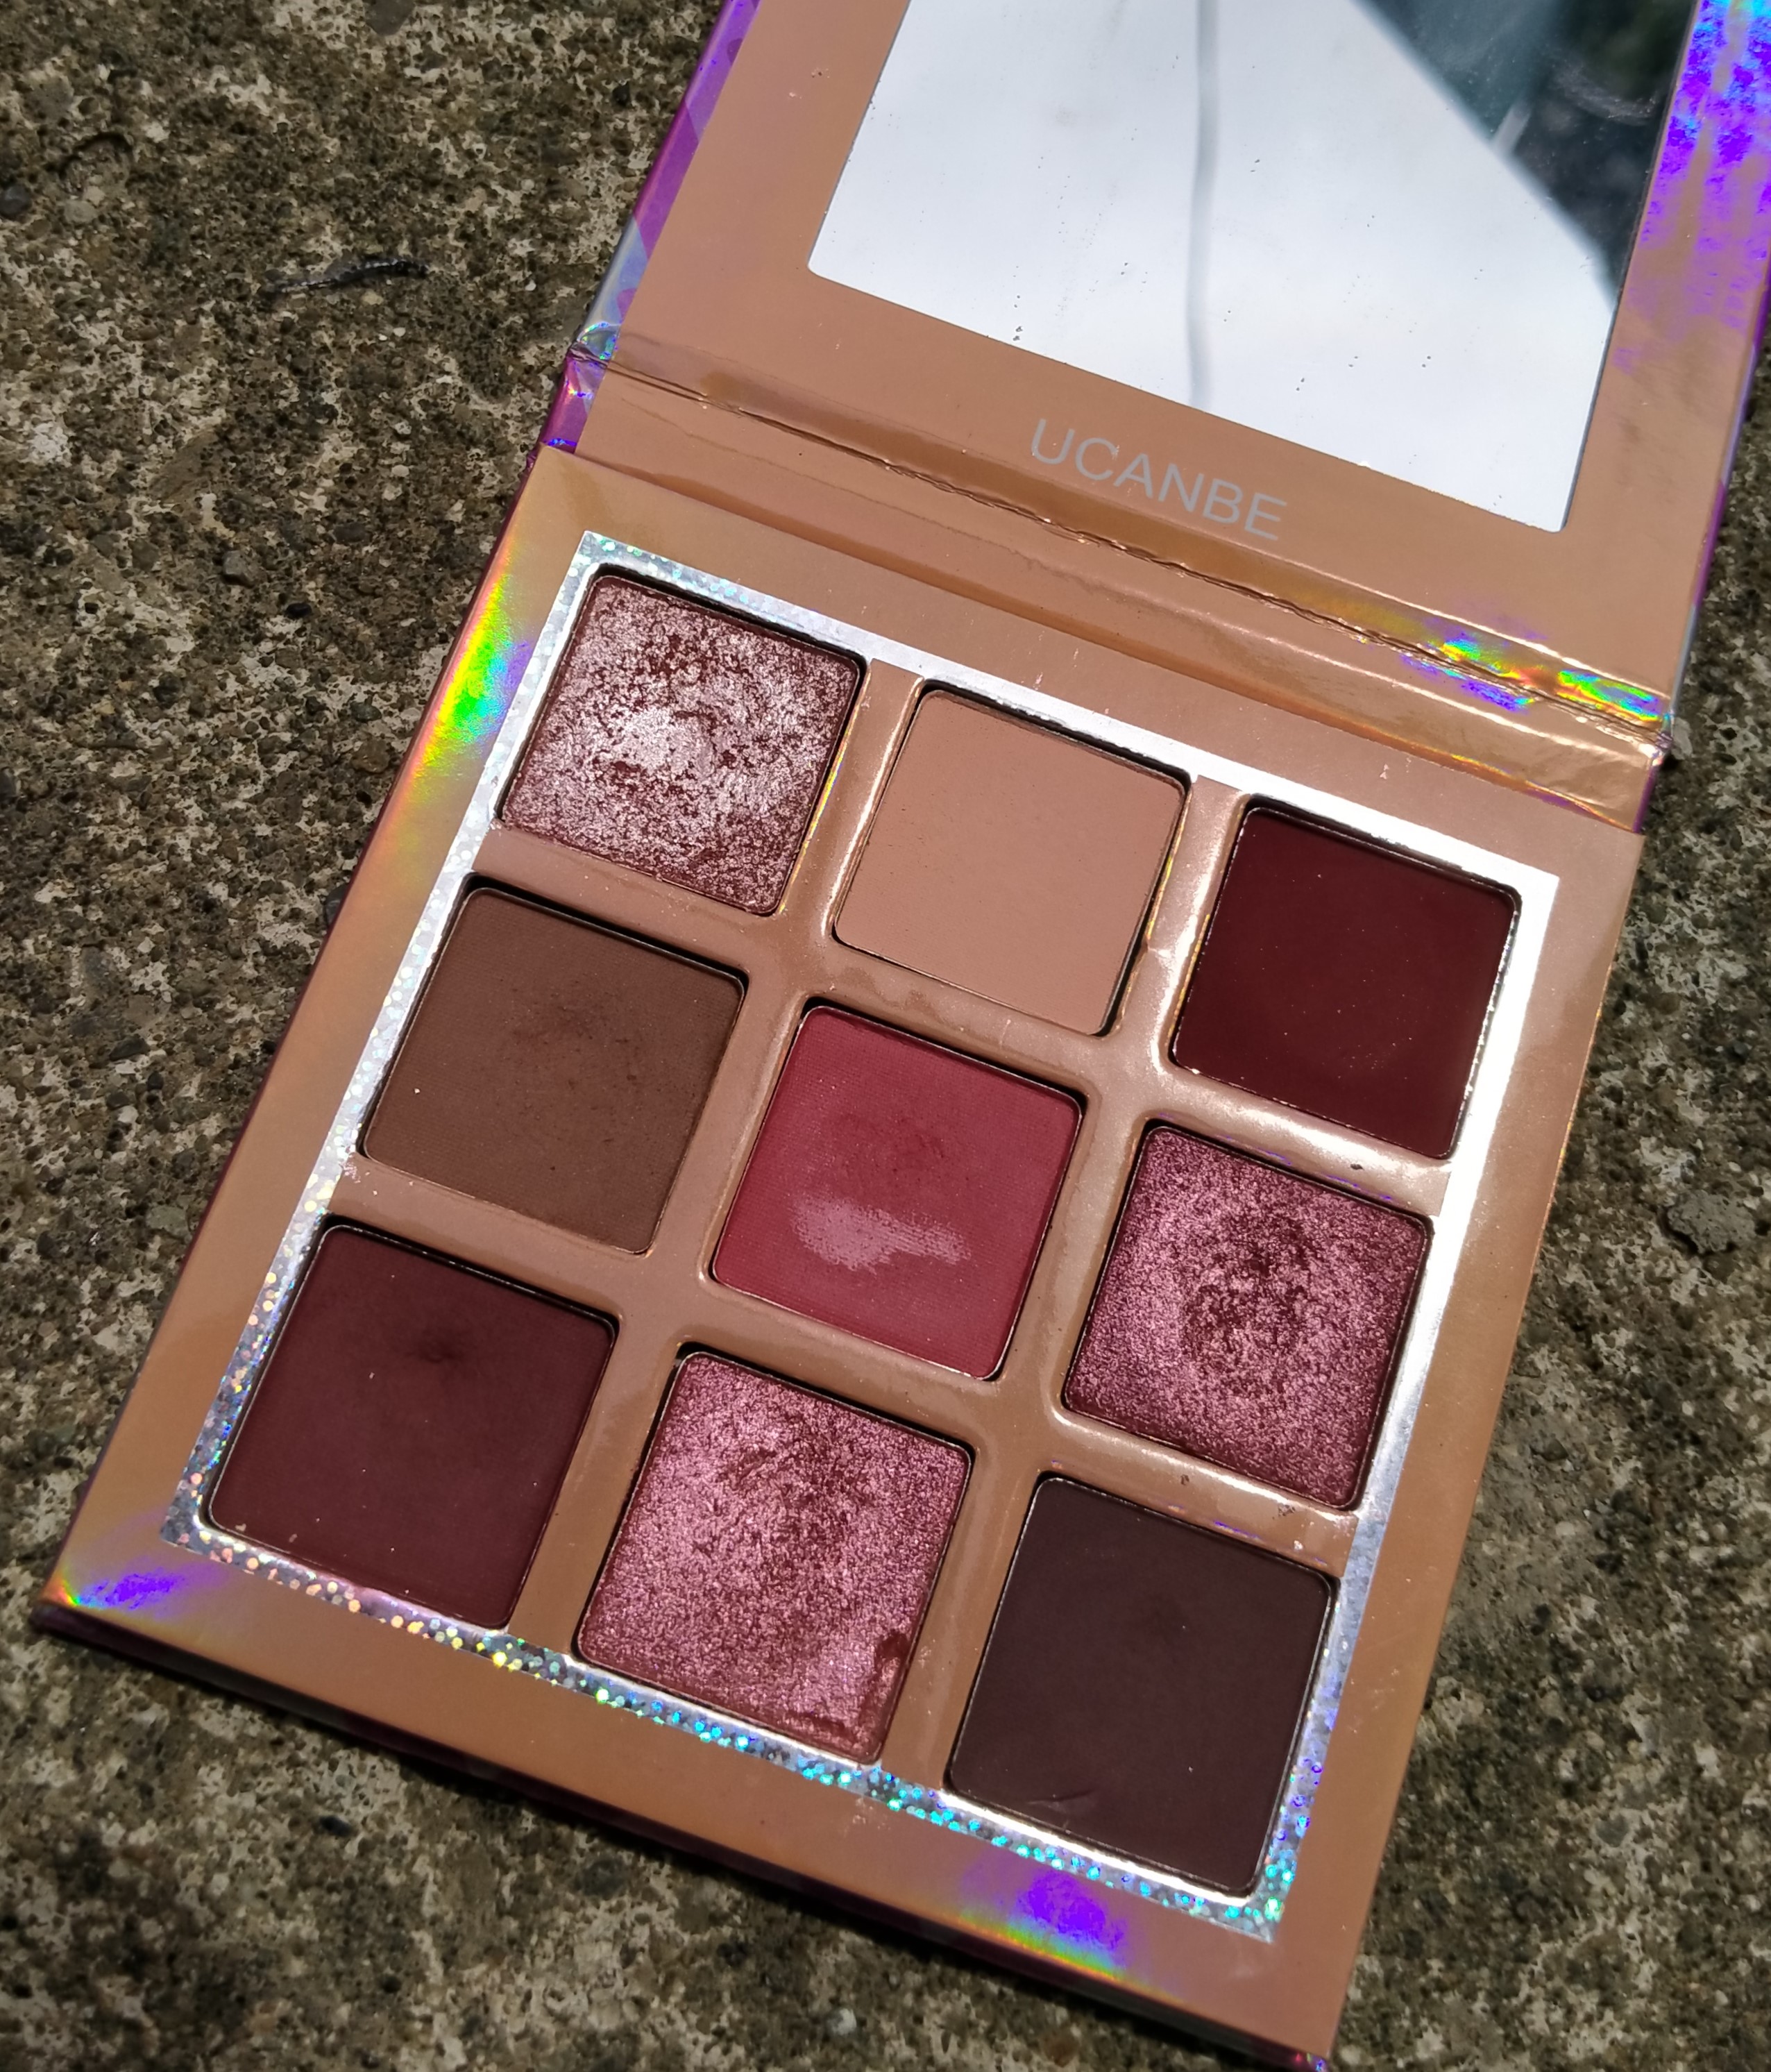 Delightful Illusions: UCANBE Marvel Palette Review